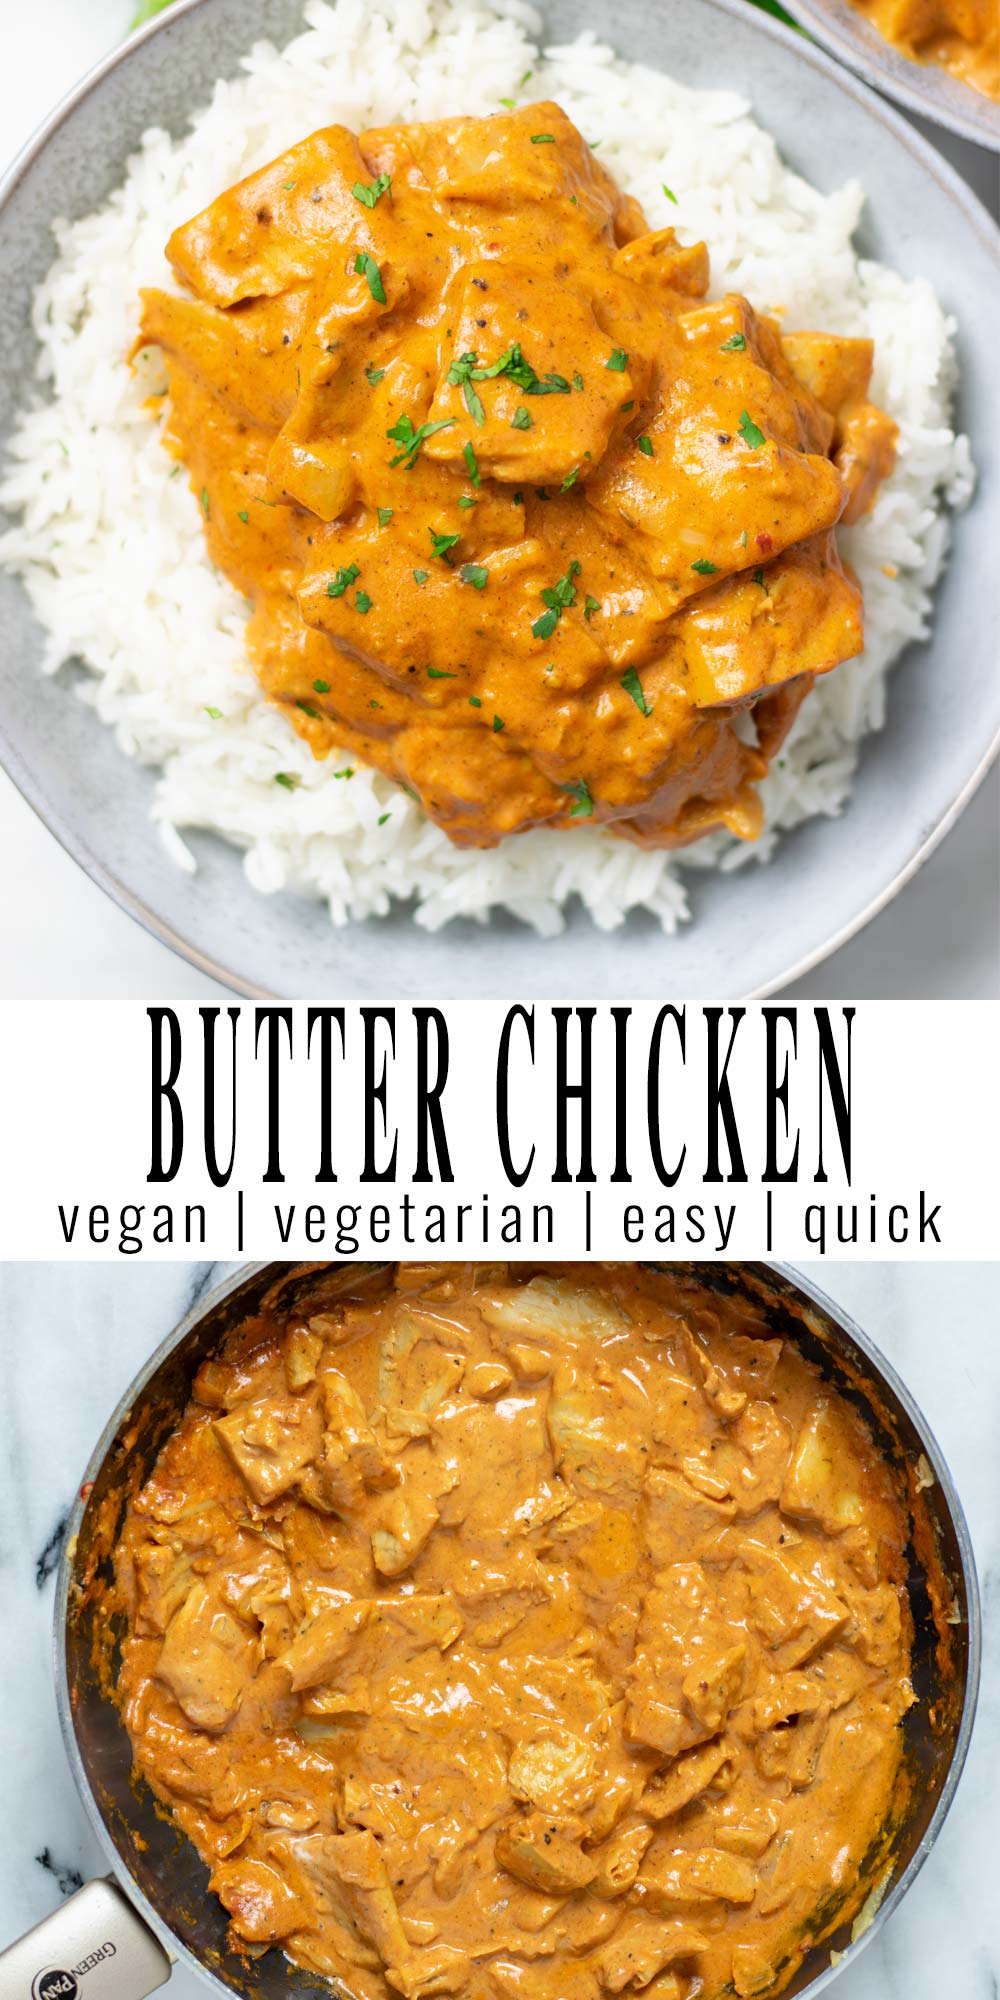 Collage of two pictures of the Butter Chicken with recipe title text.